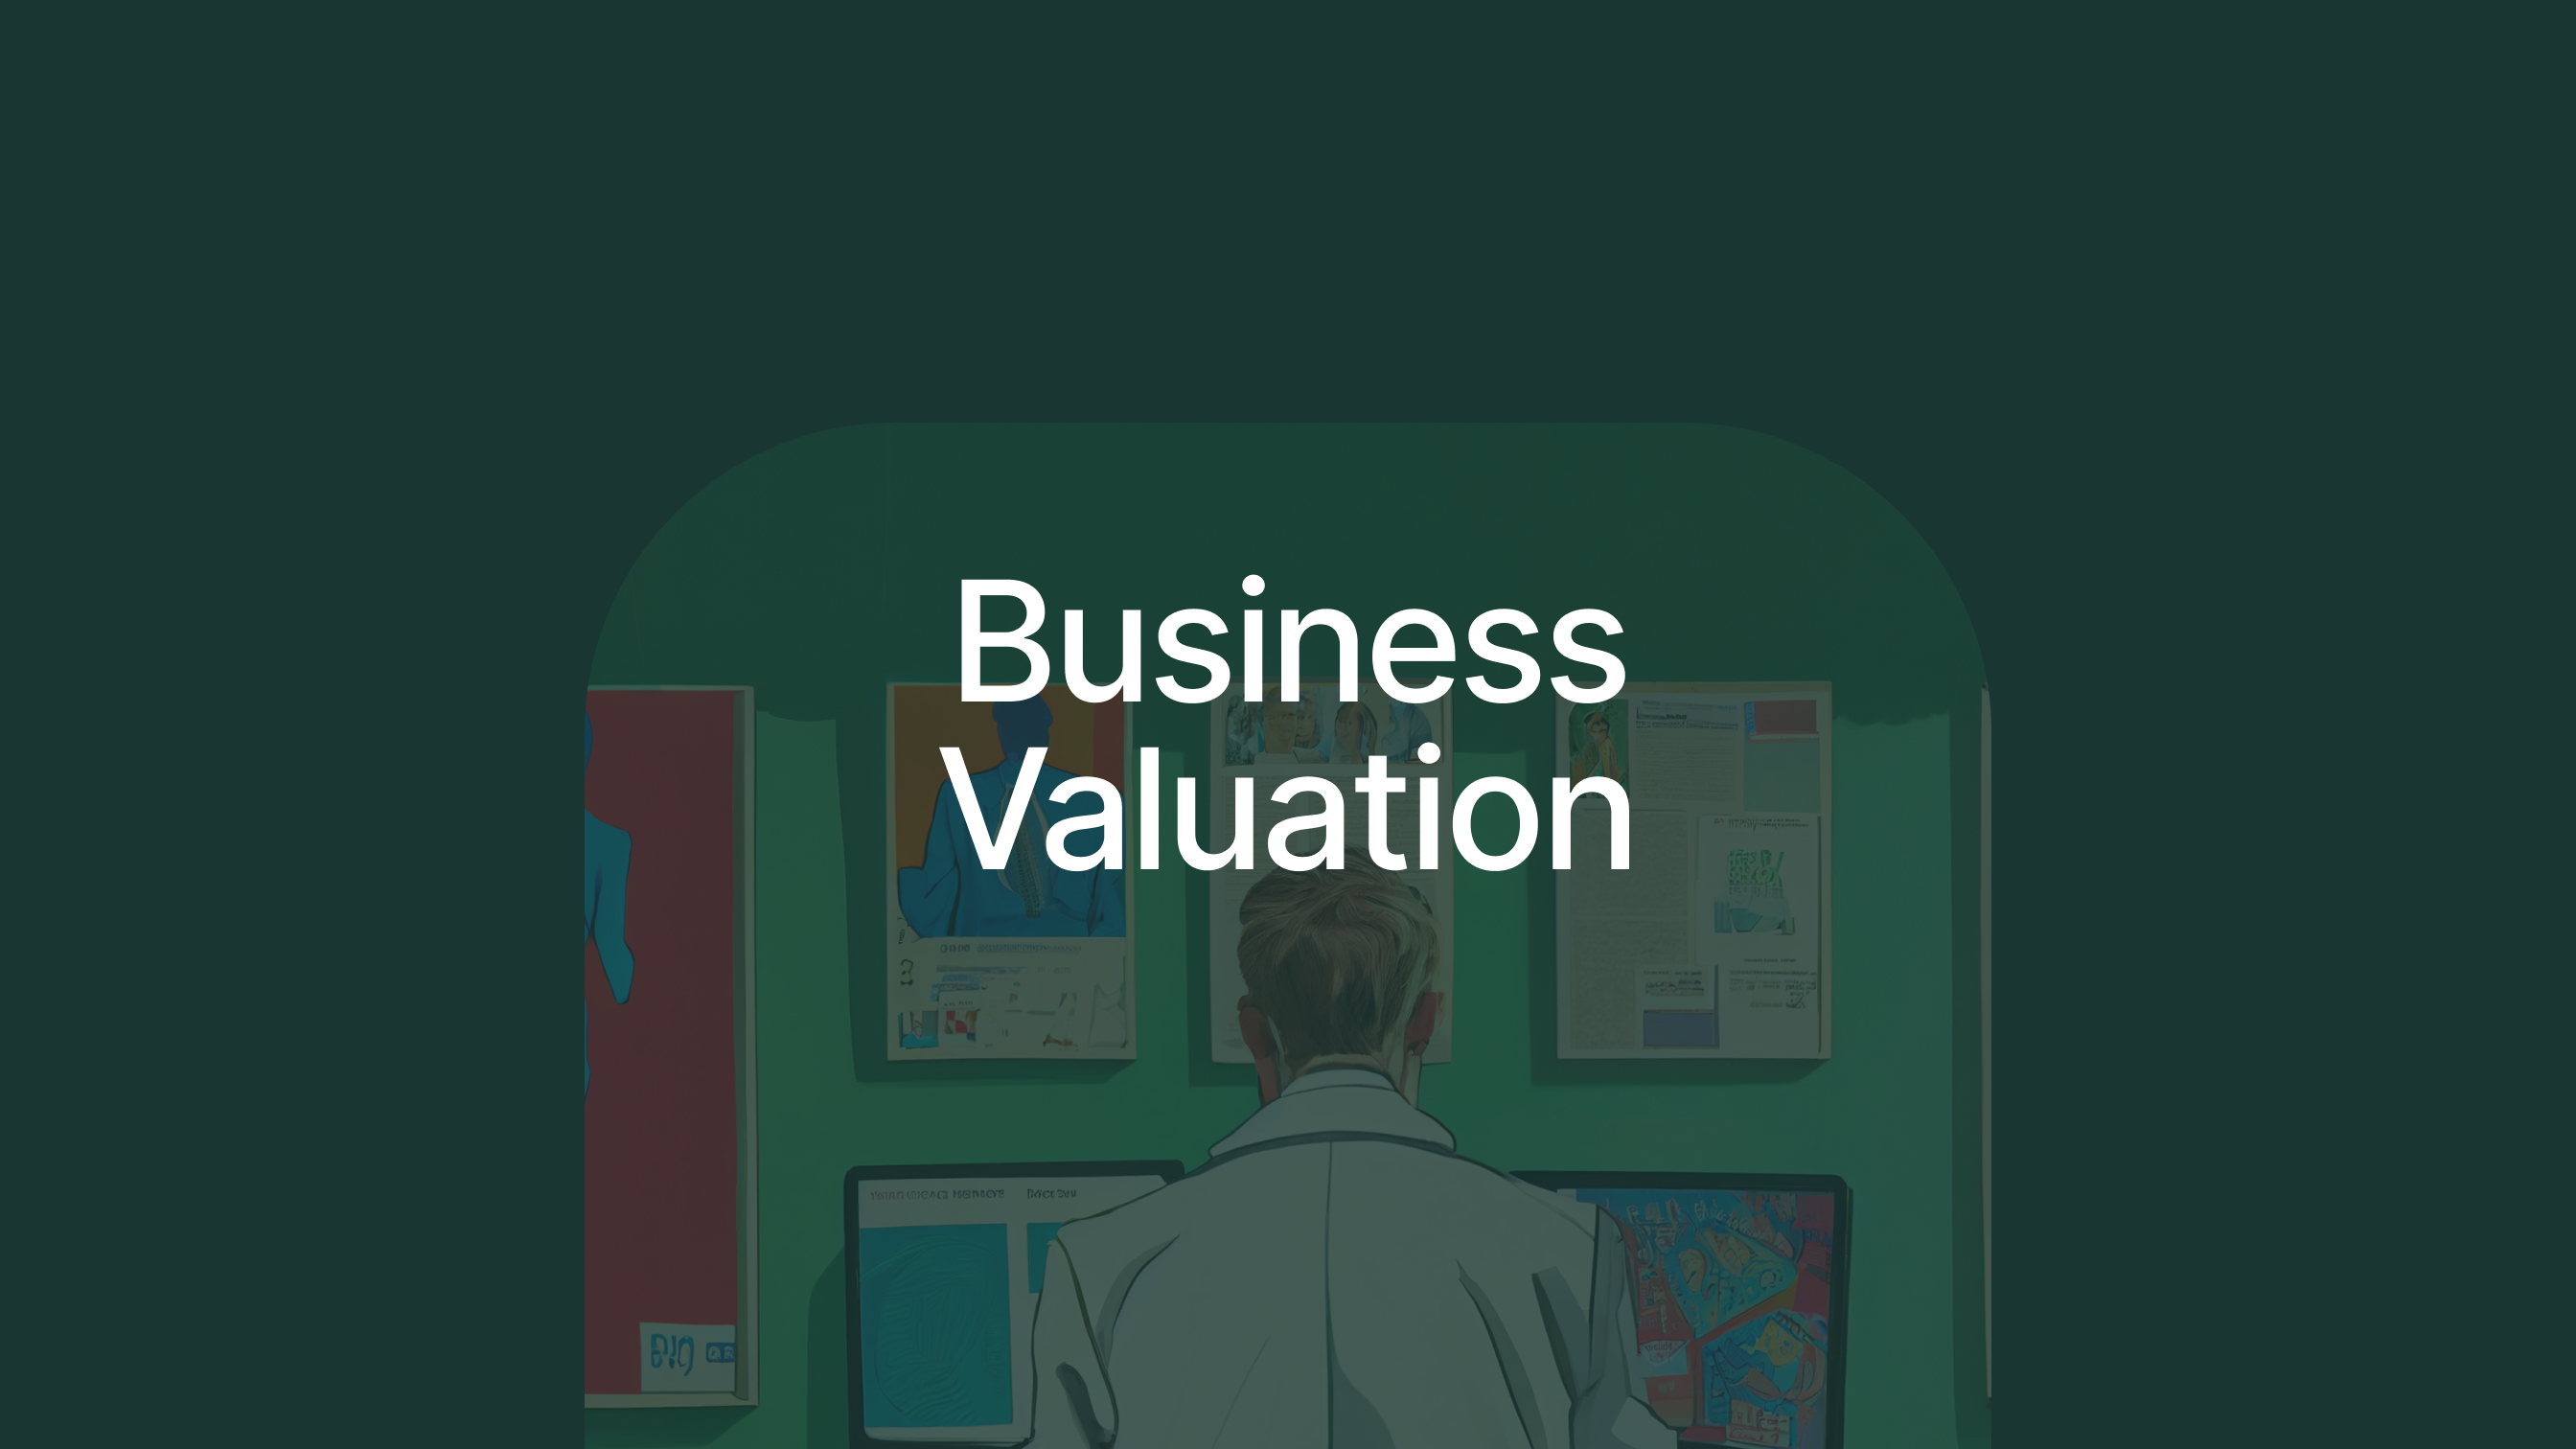 Business Valuation - Trying to determine the value of a company